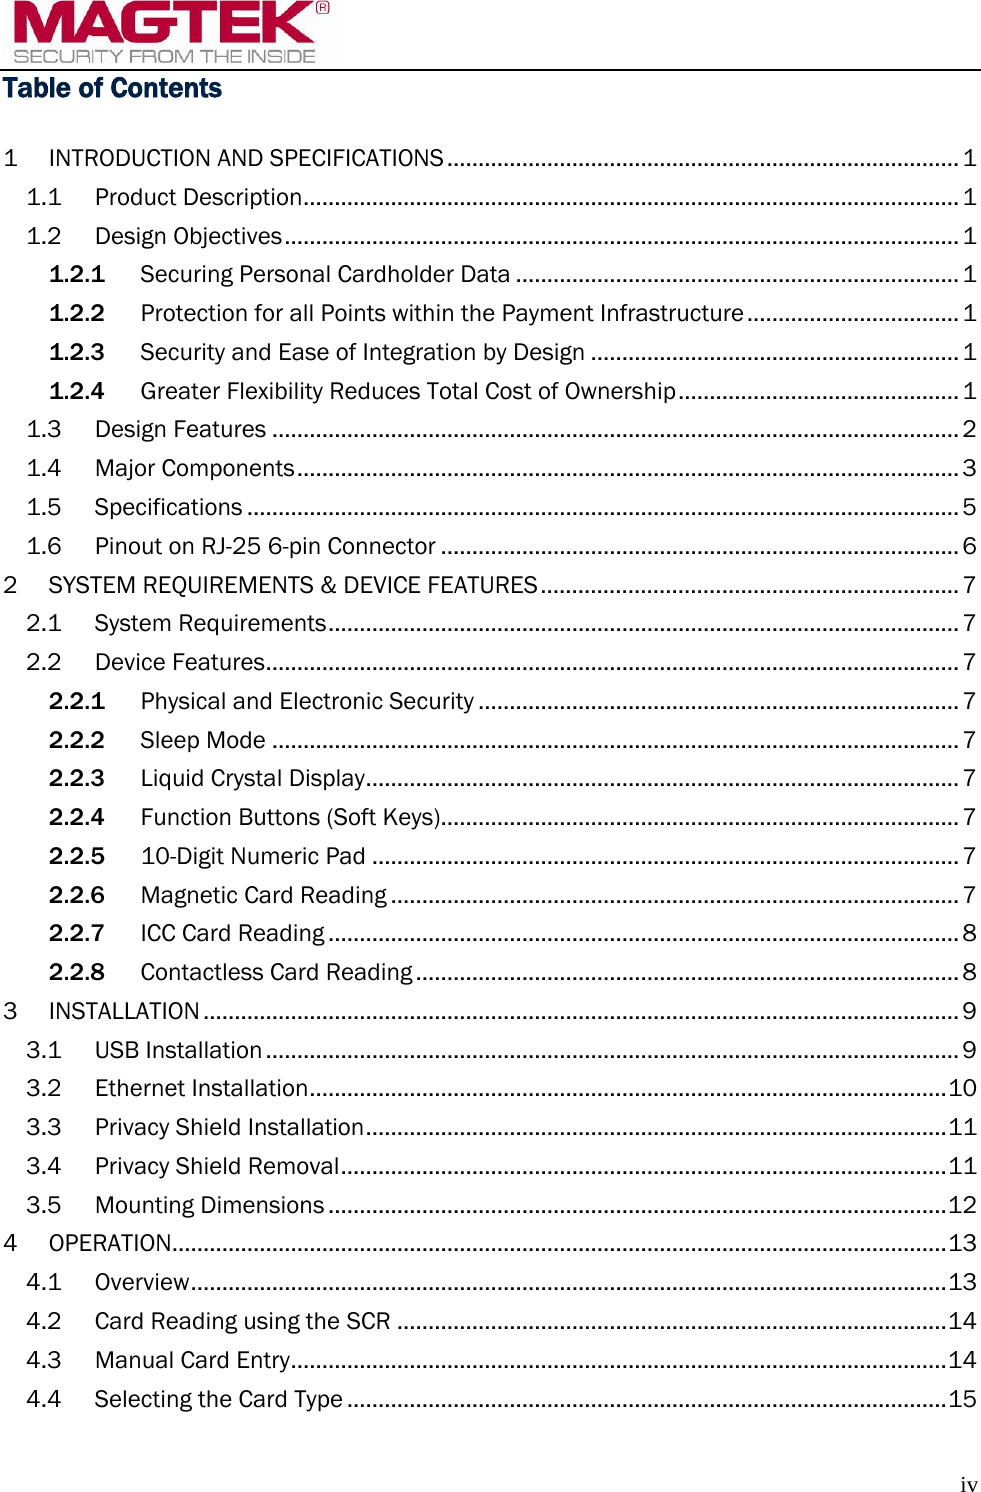  iv Table of Contents  1 INTRODUCTION AND SPECIFICATIONS .................................................................................. 1 1.1 Product Description ......................................................................................................... 1 1.2 Design Objectives ............................................................................................................ 1 1.2.1 Securing Personal Cardholder Data ....................................................................... 1 1.2.2 Protection for all Points within the Payment Infrastructure .................................. 1 1.2.3 Security and Ease of Integration by Design ........................................................... 1 1.2.4 Greater Flexibility Reduces Total Cost of Ownership ............................................. 1 1.3 Design Features .............................................................................................................. 2 1.4 Major Components .......................................................................................................... 3 1.5 Specifications .................................................................................................................. 5 1.6 Pinout on RJ-25 6-pin Connector ................................................................................... 6 2 SYSTEM REQUIREMENTS &amp; DEVICE FEATURES ................................................................... 7 2.1 System Requirements ..................................................................................................... 7 2.2 Device Features ............................................................................................................... 7 2.2.1 Physical and Electronic Security ............................................................................. 7 2.2.2 Sleep Mode .............................................................................................................. 7 2.2.3 Liquid Crystal Display ............................................................................................... 7 2.2.4 Function Buttons (Soft Keys)................................................................................... 7 2.2.5 10-Digit Numeric Pad .............................................................................................. 7 2.2.6 Magnetic Card Reading ........................................................................................... 7 2.2.7 ICC Card Reading ..................................................................................................... 8 2.2.8 Contactless Card Reading ....................................................................................... 8 3 INSTALLATION ......................................................................................................................... 9 3.1 USB Installation ............................................................................................................... 9 3.2 Ethernet Installation ...................................................................................................... 10 3.3 Privacy Shield Installation ............................................................................................. 11 3.4 Privacy Shield Removal ................................................................................................. 11 3.5 Mounting Dimensions ................................................................................................... 12 4 OPERATION ............................................................................................................................ 13 4.1 Overview ......................................................................................................................... 13 4.2 Card Reading using the SCR ........................................................................................ 14 4.3 Manual Card Entry ......................................................................................................... 14 4.4 Selecting the Card Type ................................................................................................ 15 